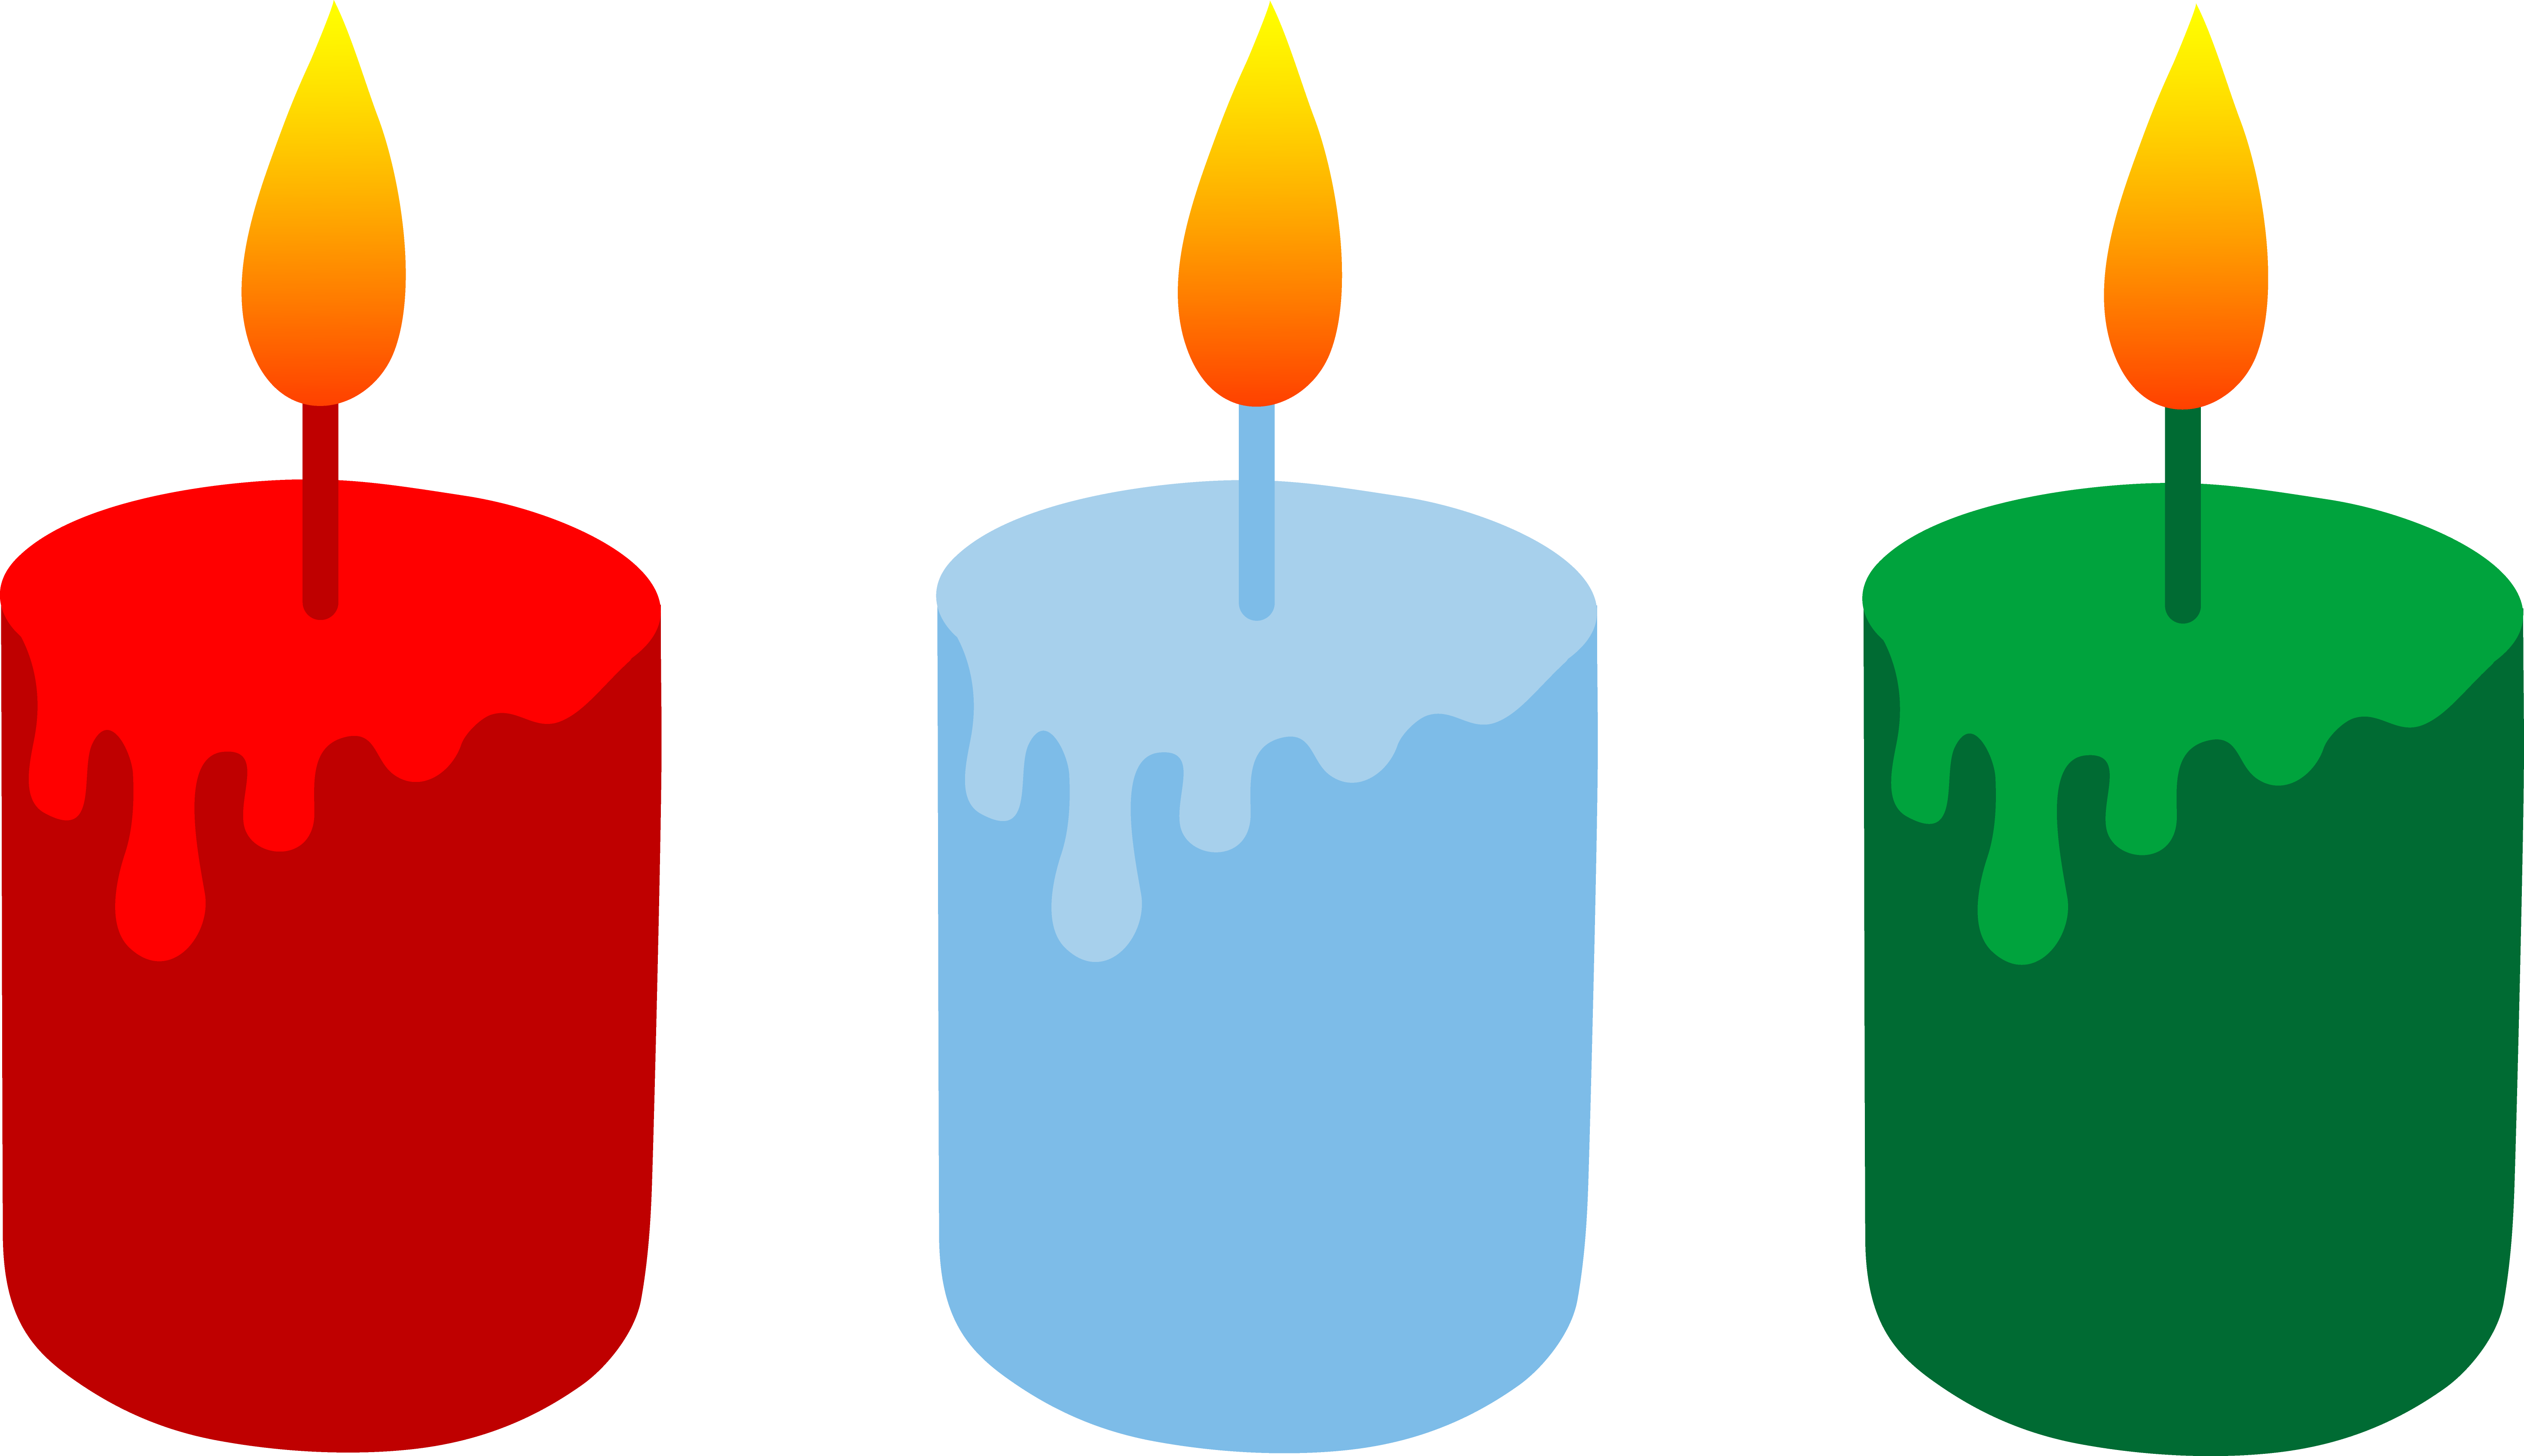 Candle free to use clipart